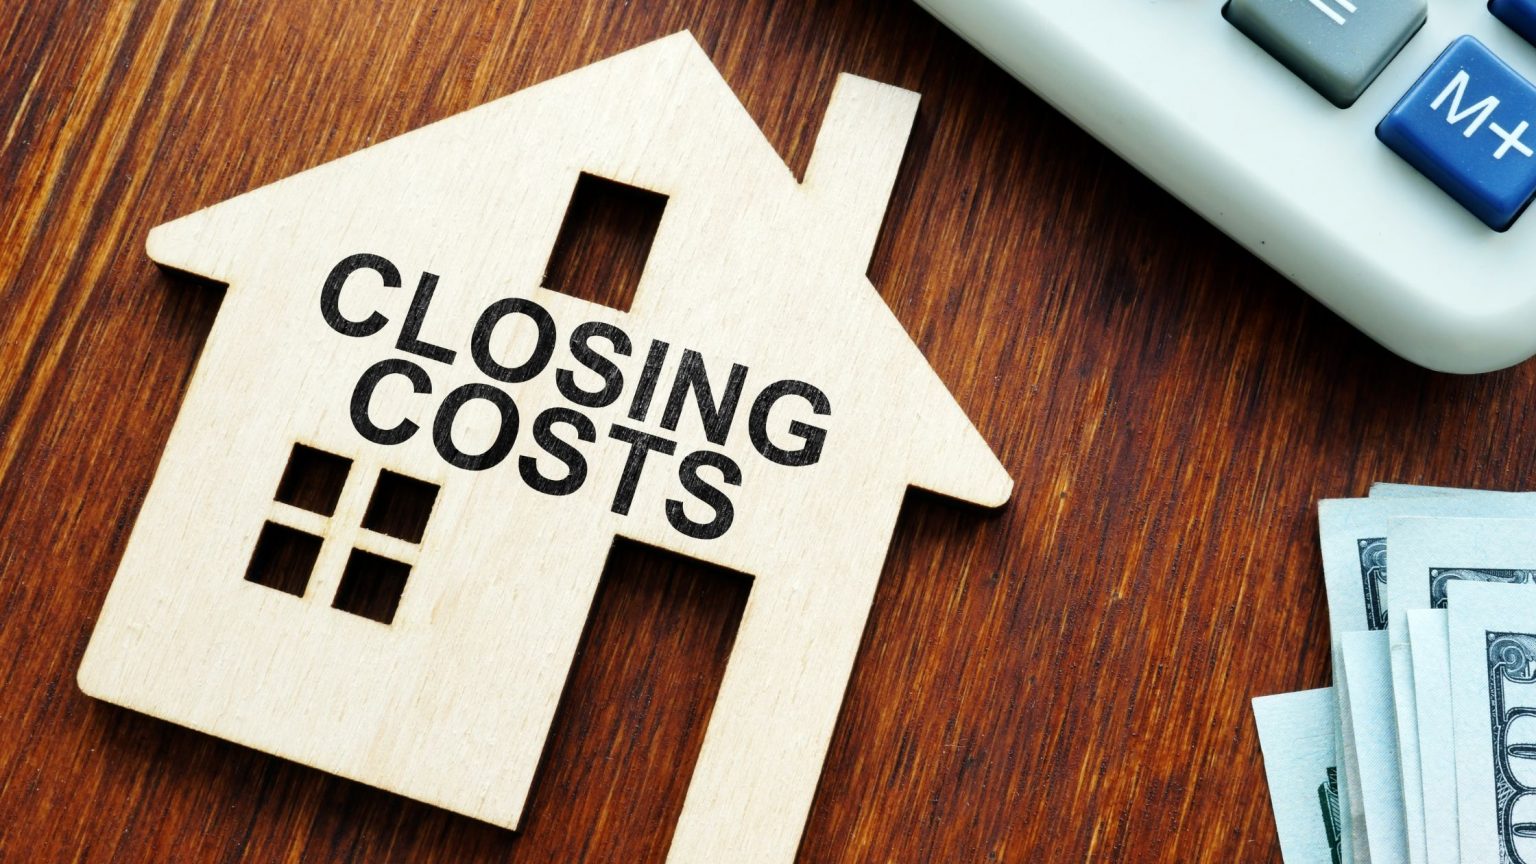 Wooden house laying on brown wooden table that reads "CLOSING COSTS"